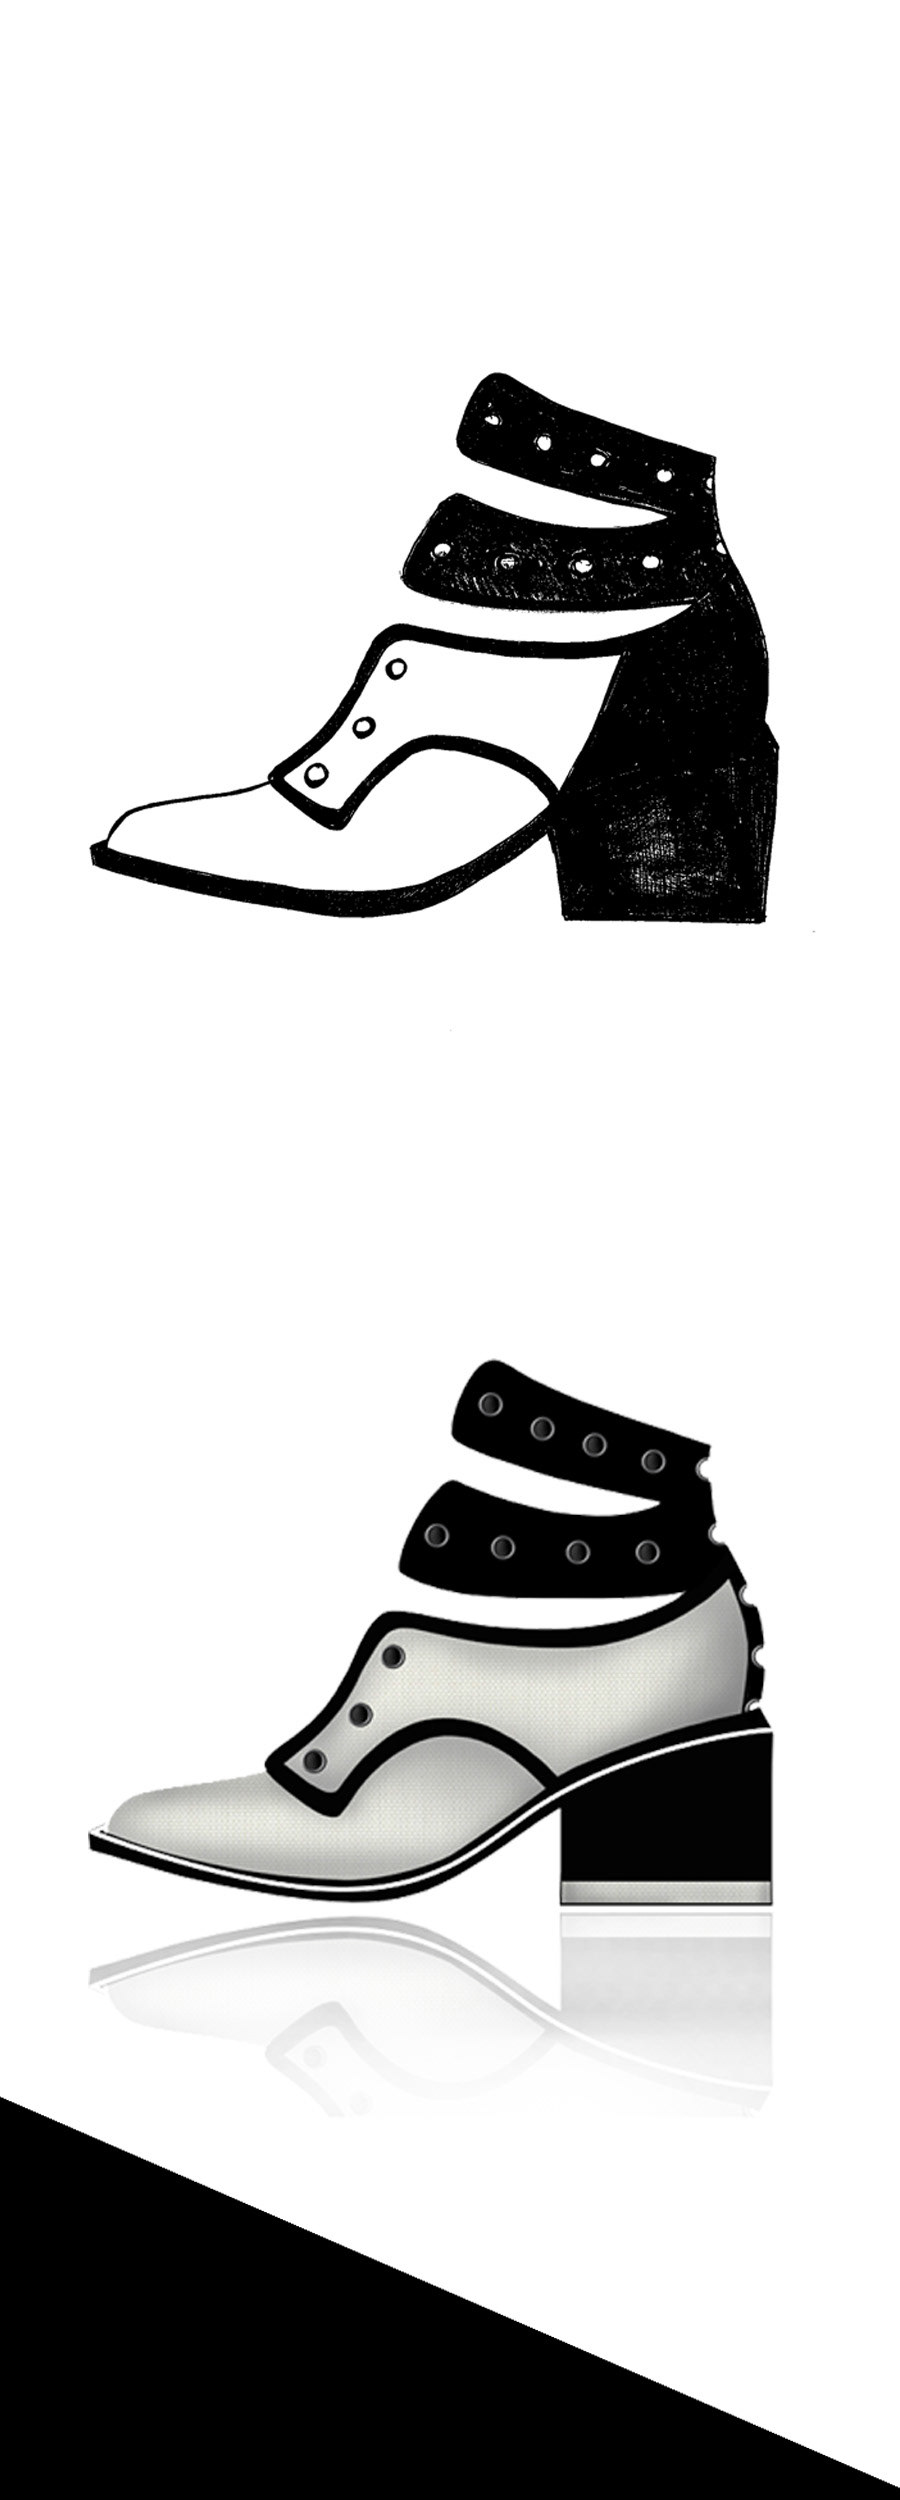 footwear design shoes androgyny inspioration skecth